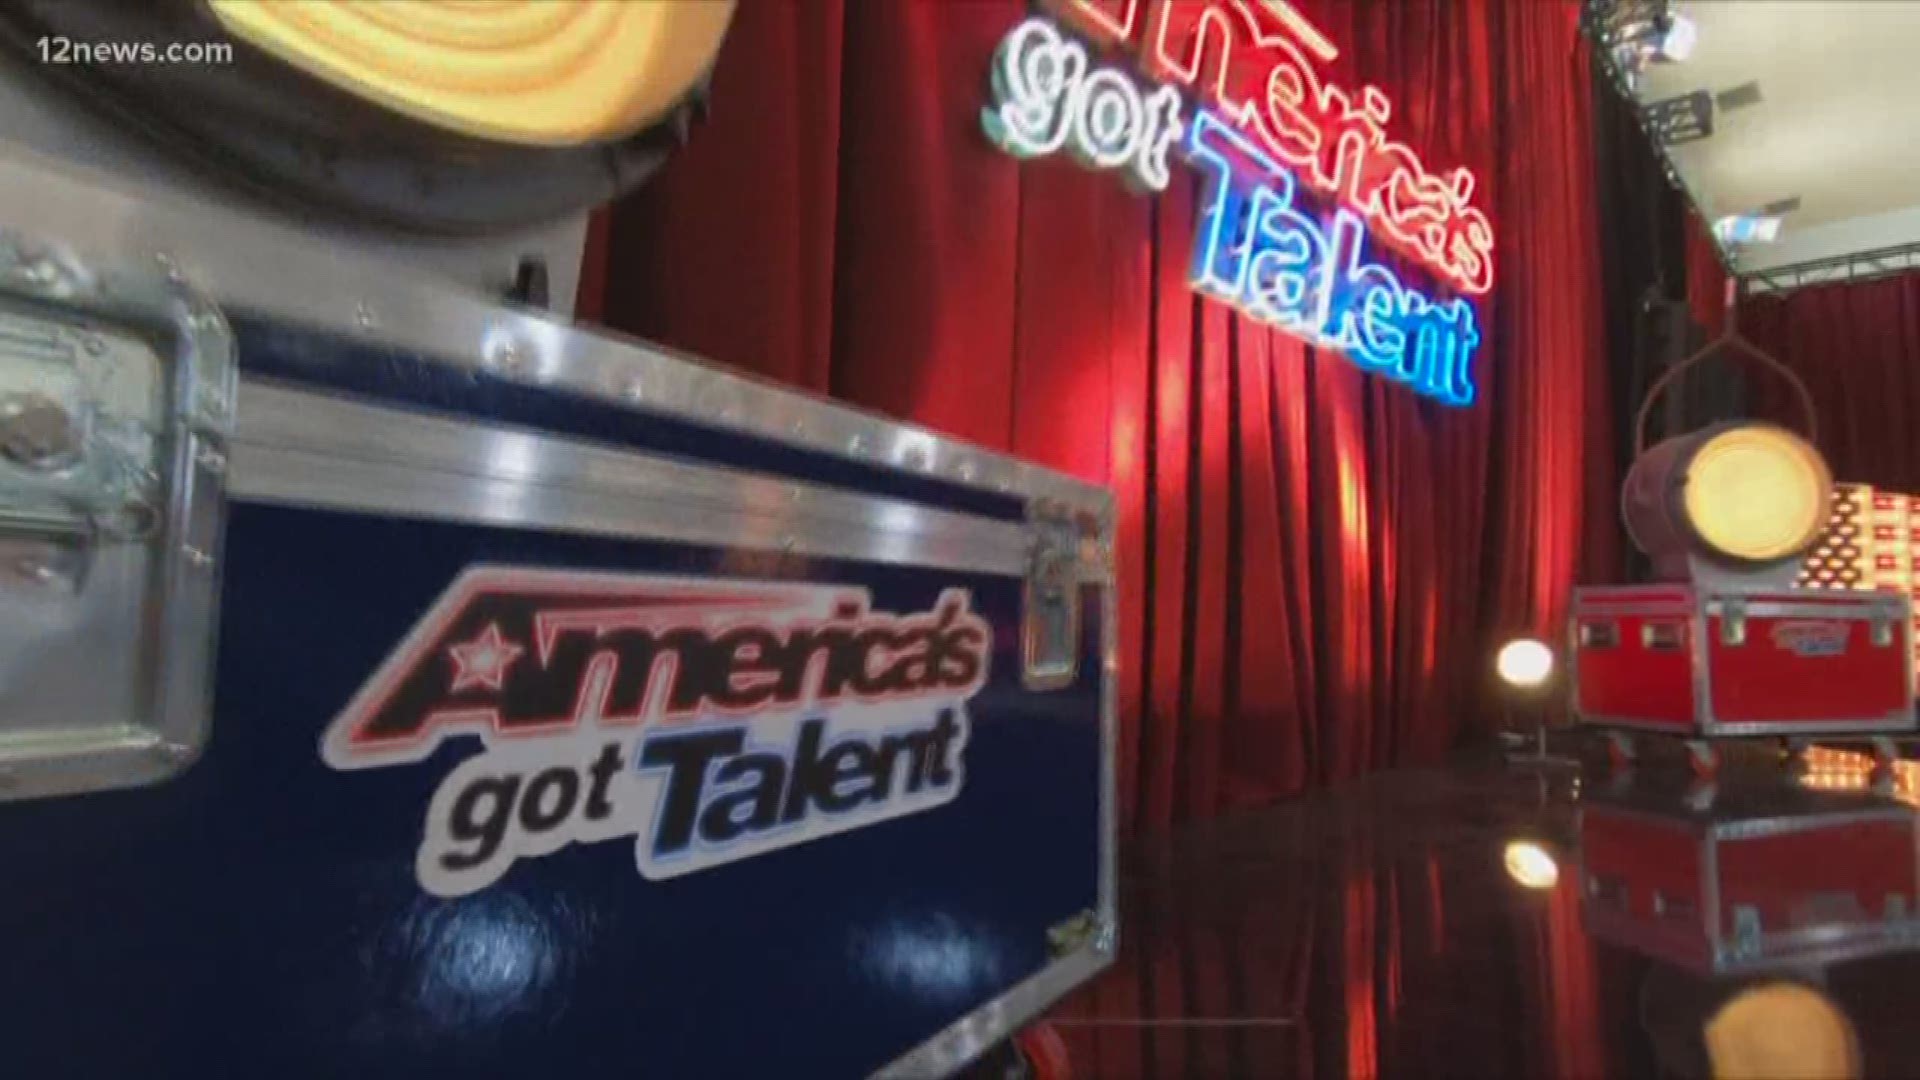 "America's Got Talent" returns to NBC Tuesday night. We give you the scoop on the new season with behind-the-scenes access with the judges on set.